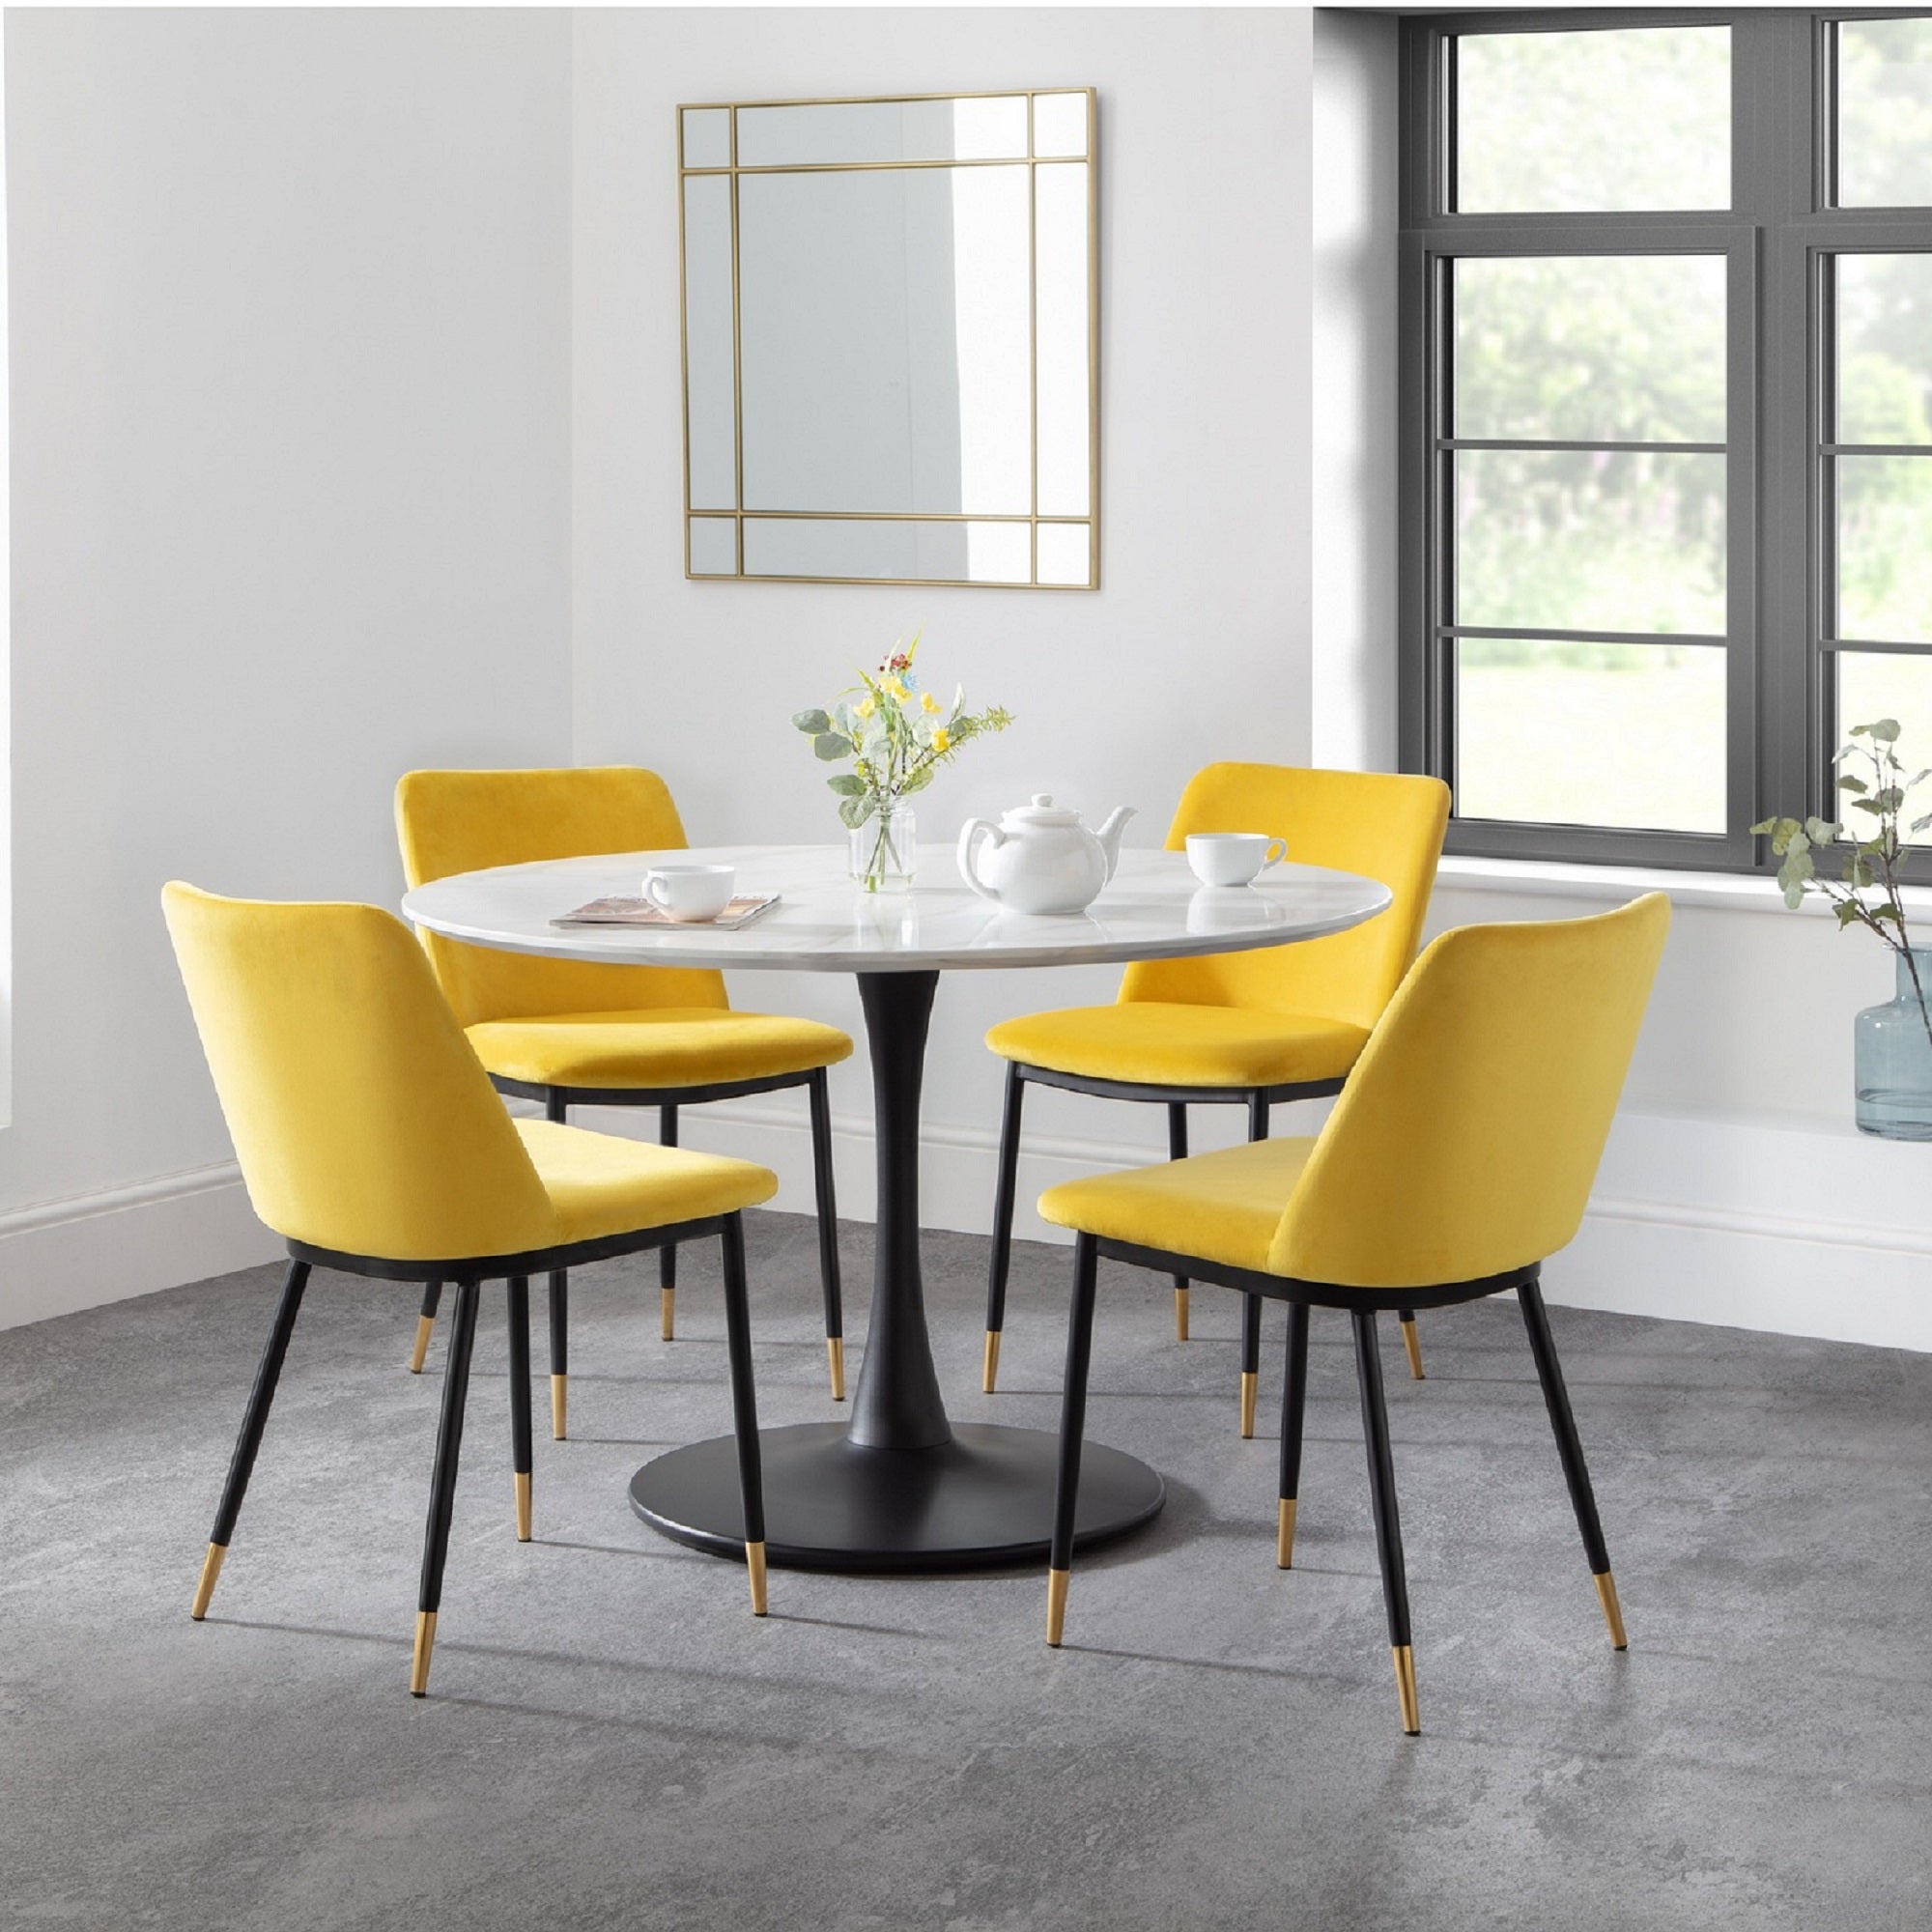 Holland Round Pedestal Dining Table with 4 Delaunay Chairs Mustard